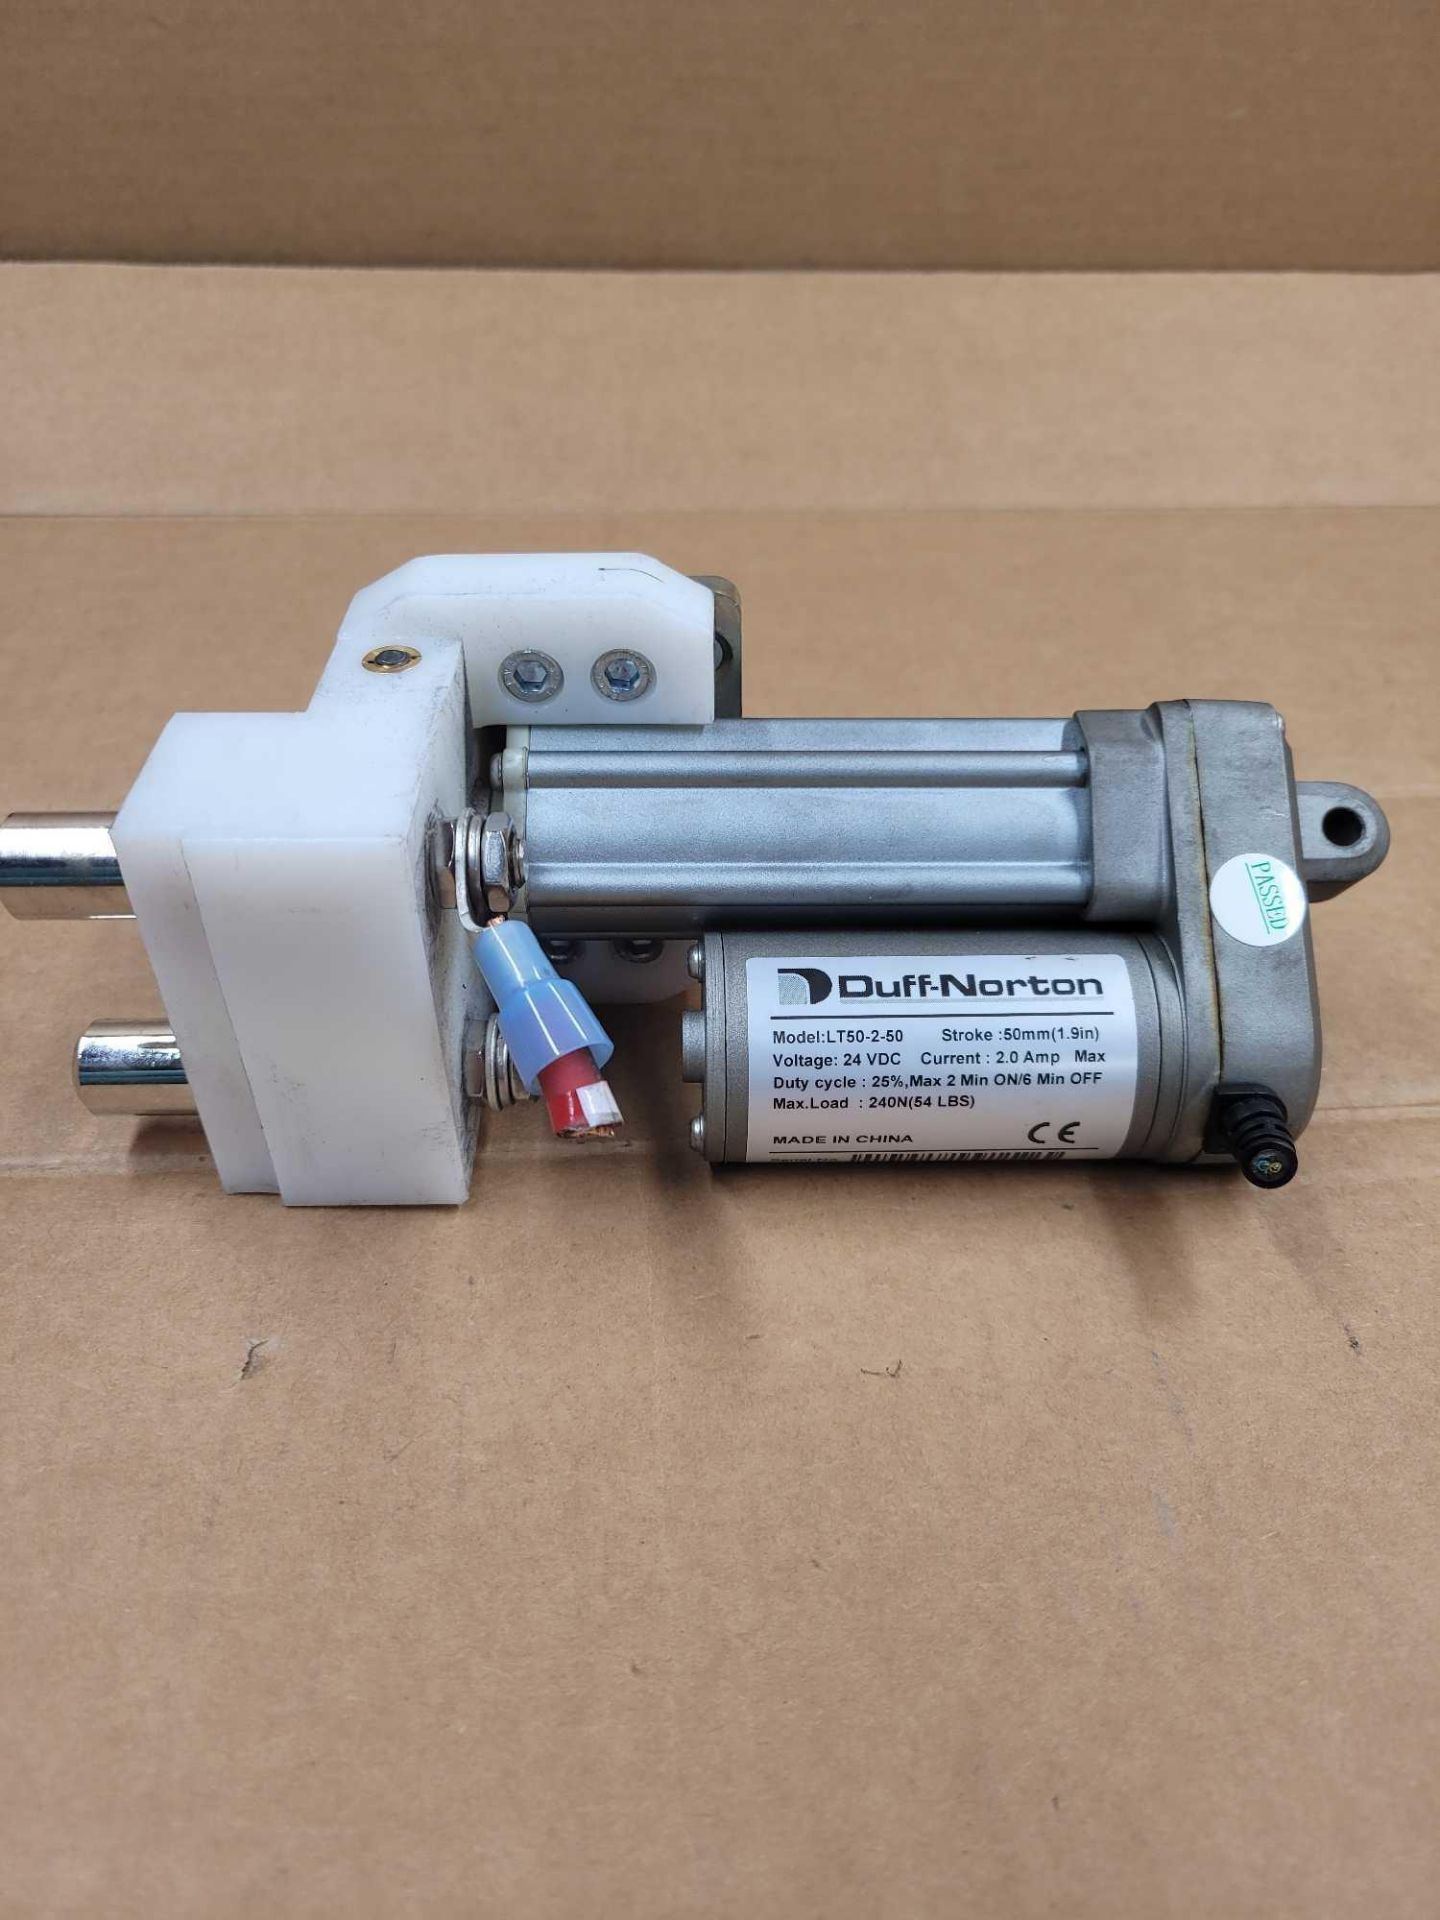 LOT OF 4 DUFF-NORTON LT50-2-50 / Linear Actuator  /  Lot Weight: 12.6 lbs - Image 3 of 9